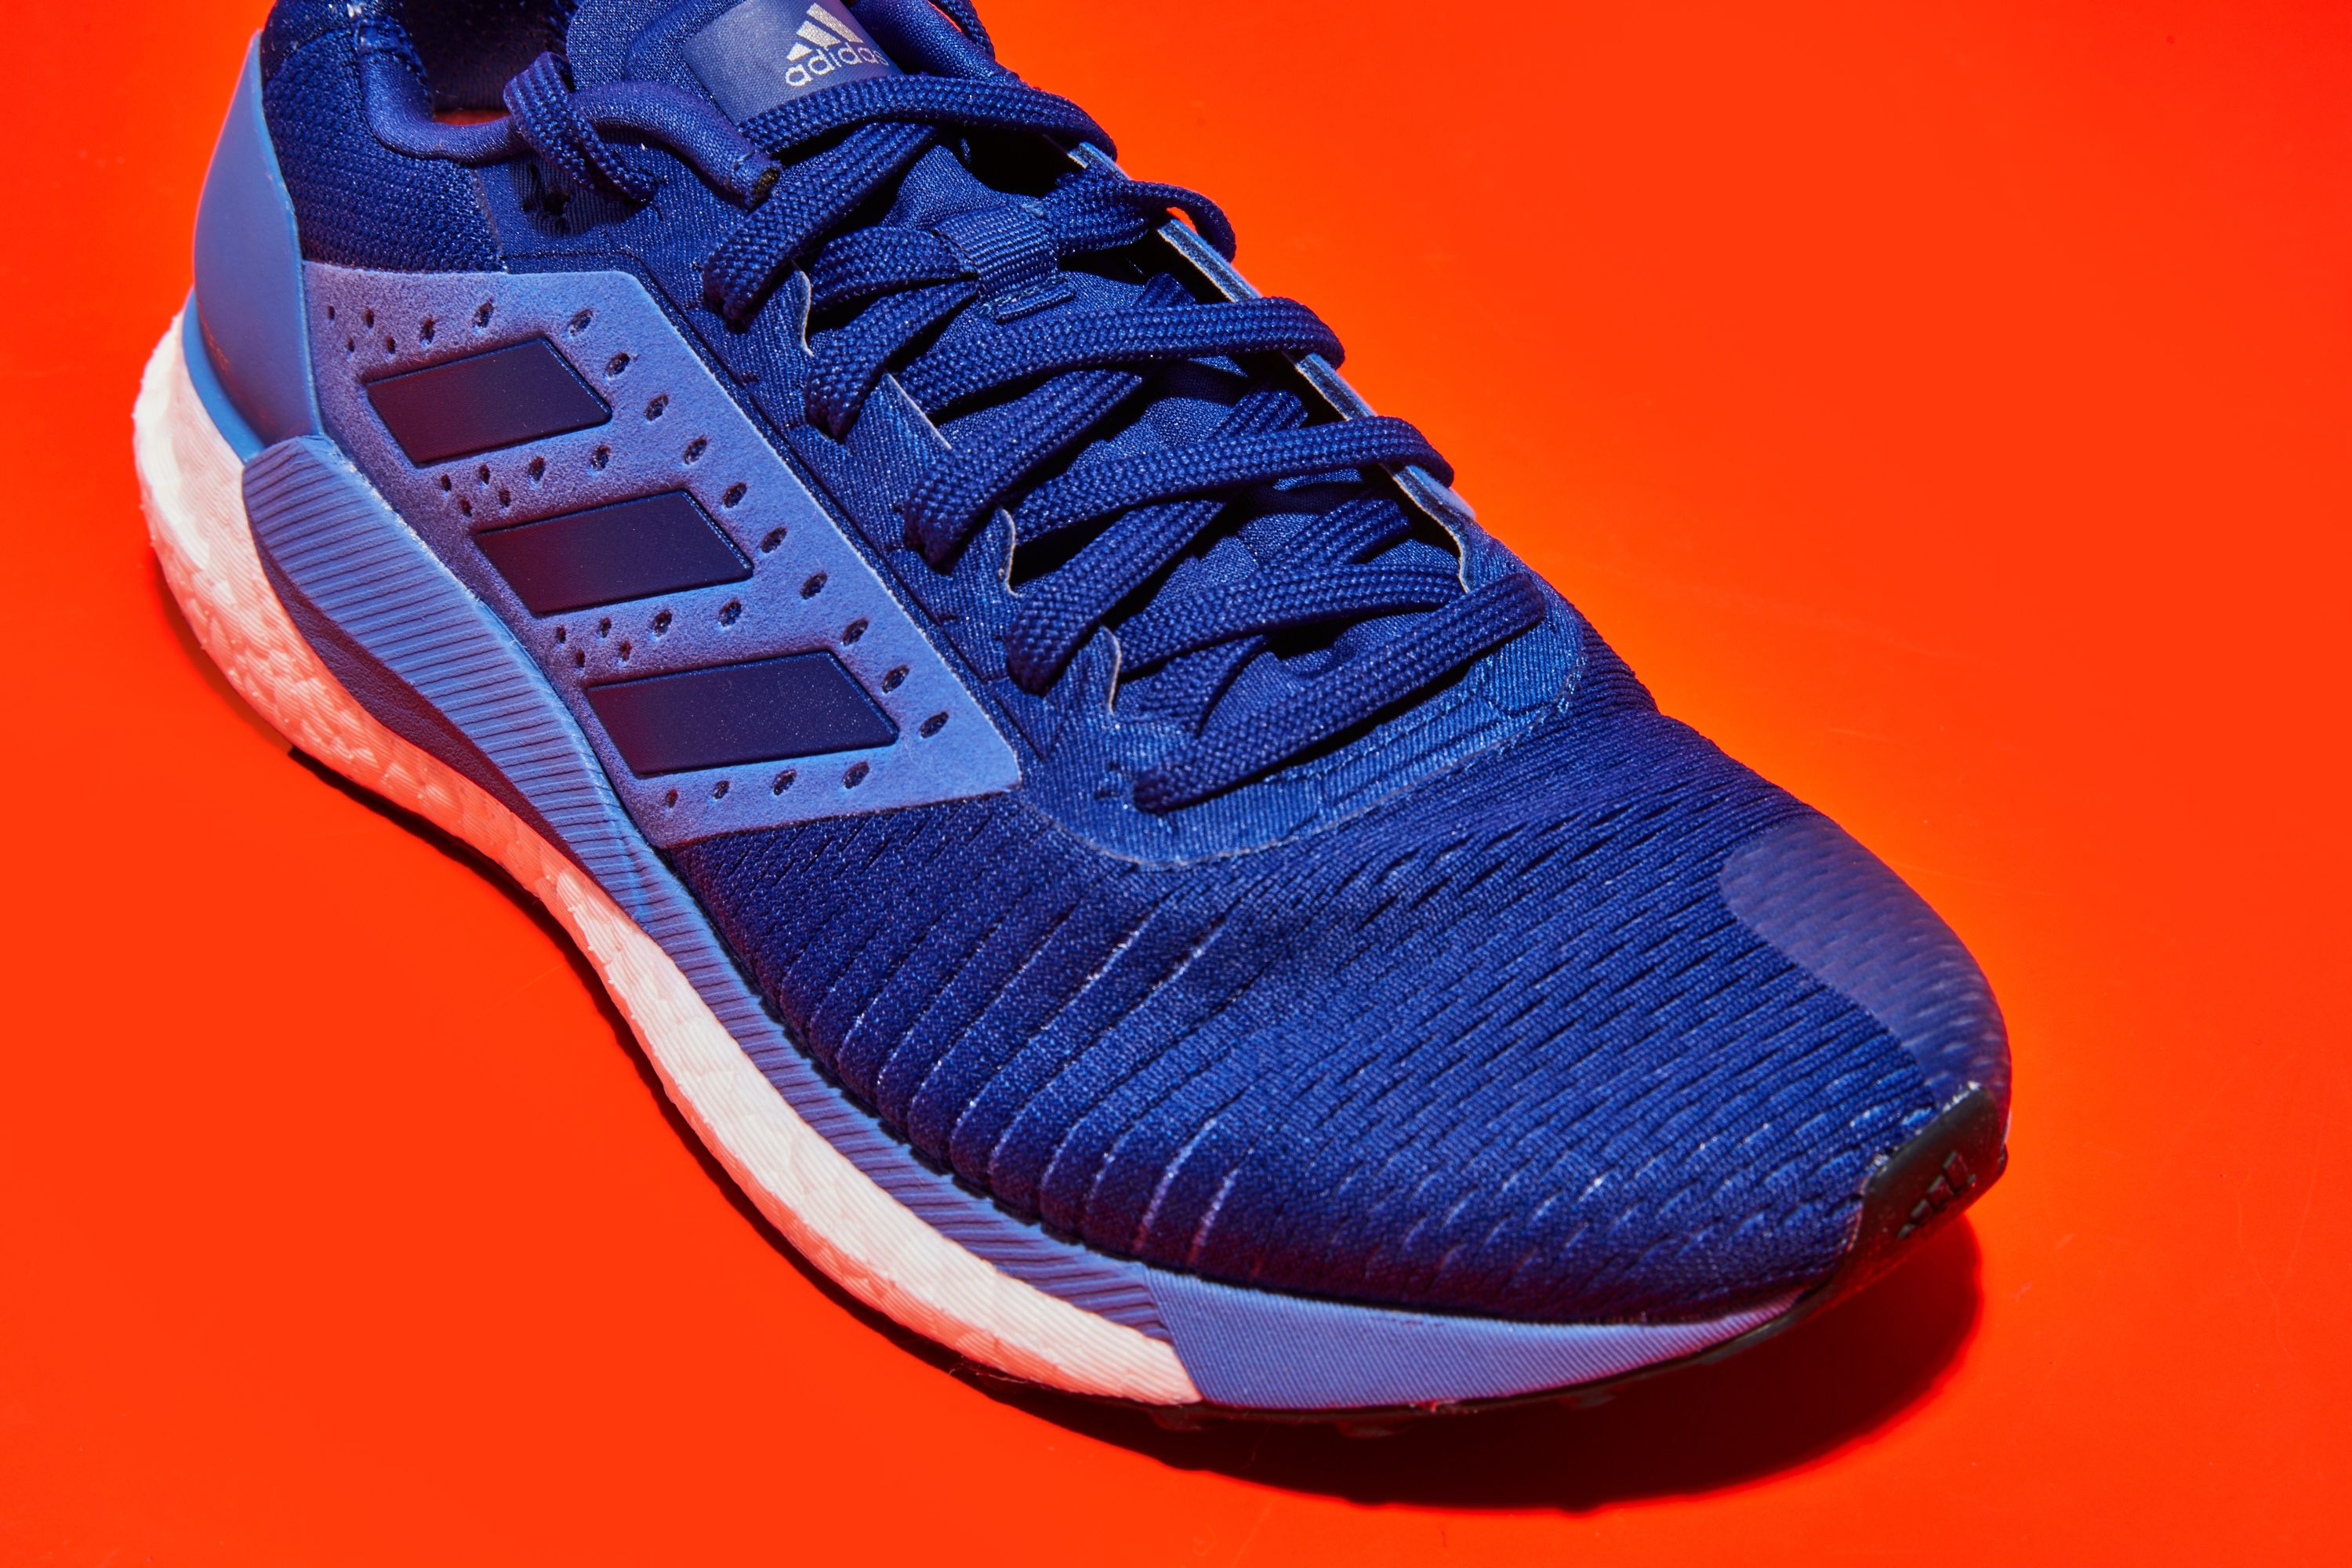 The Adidas Solar Glide ST Provides 